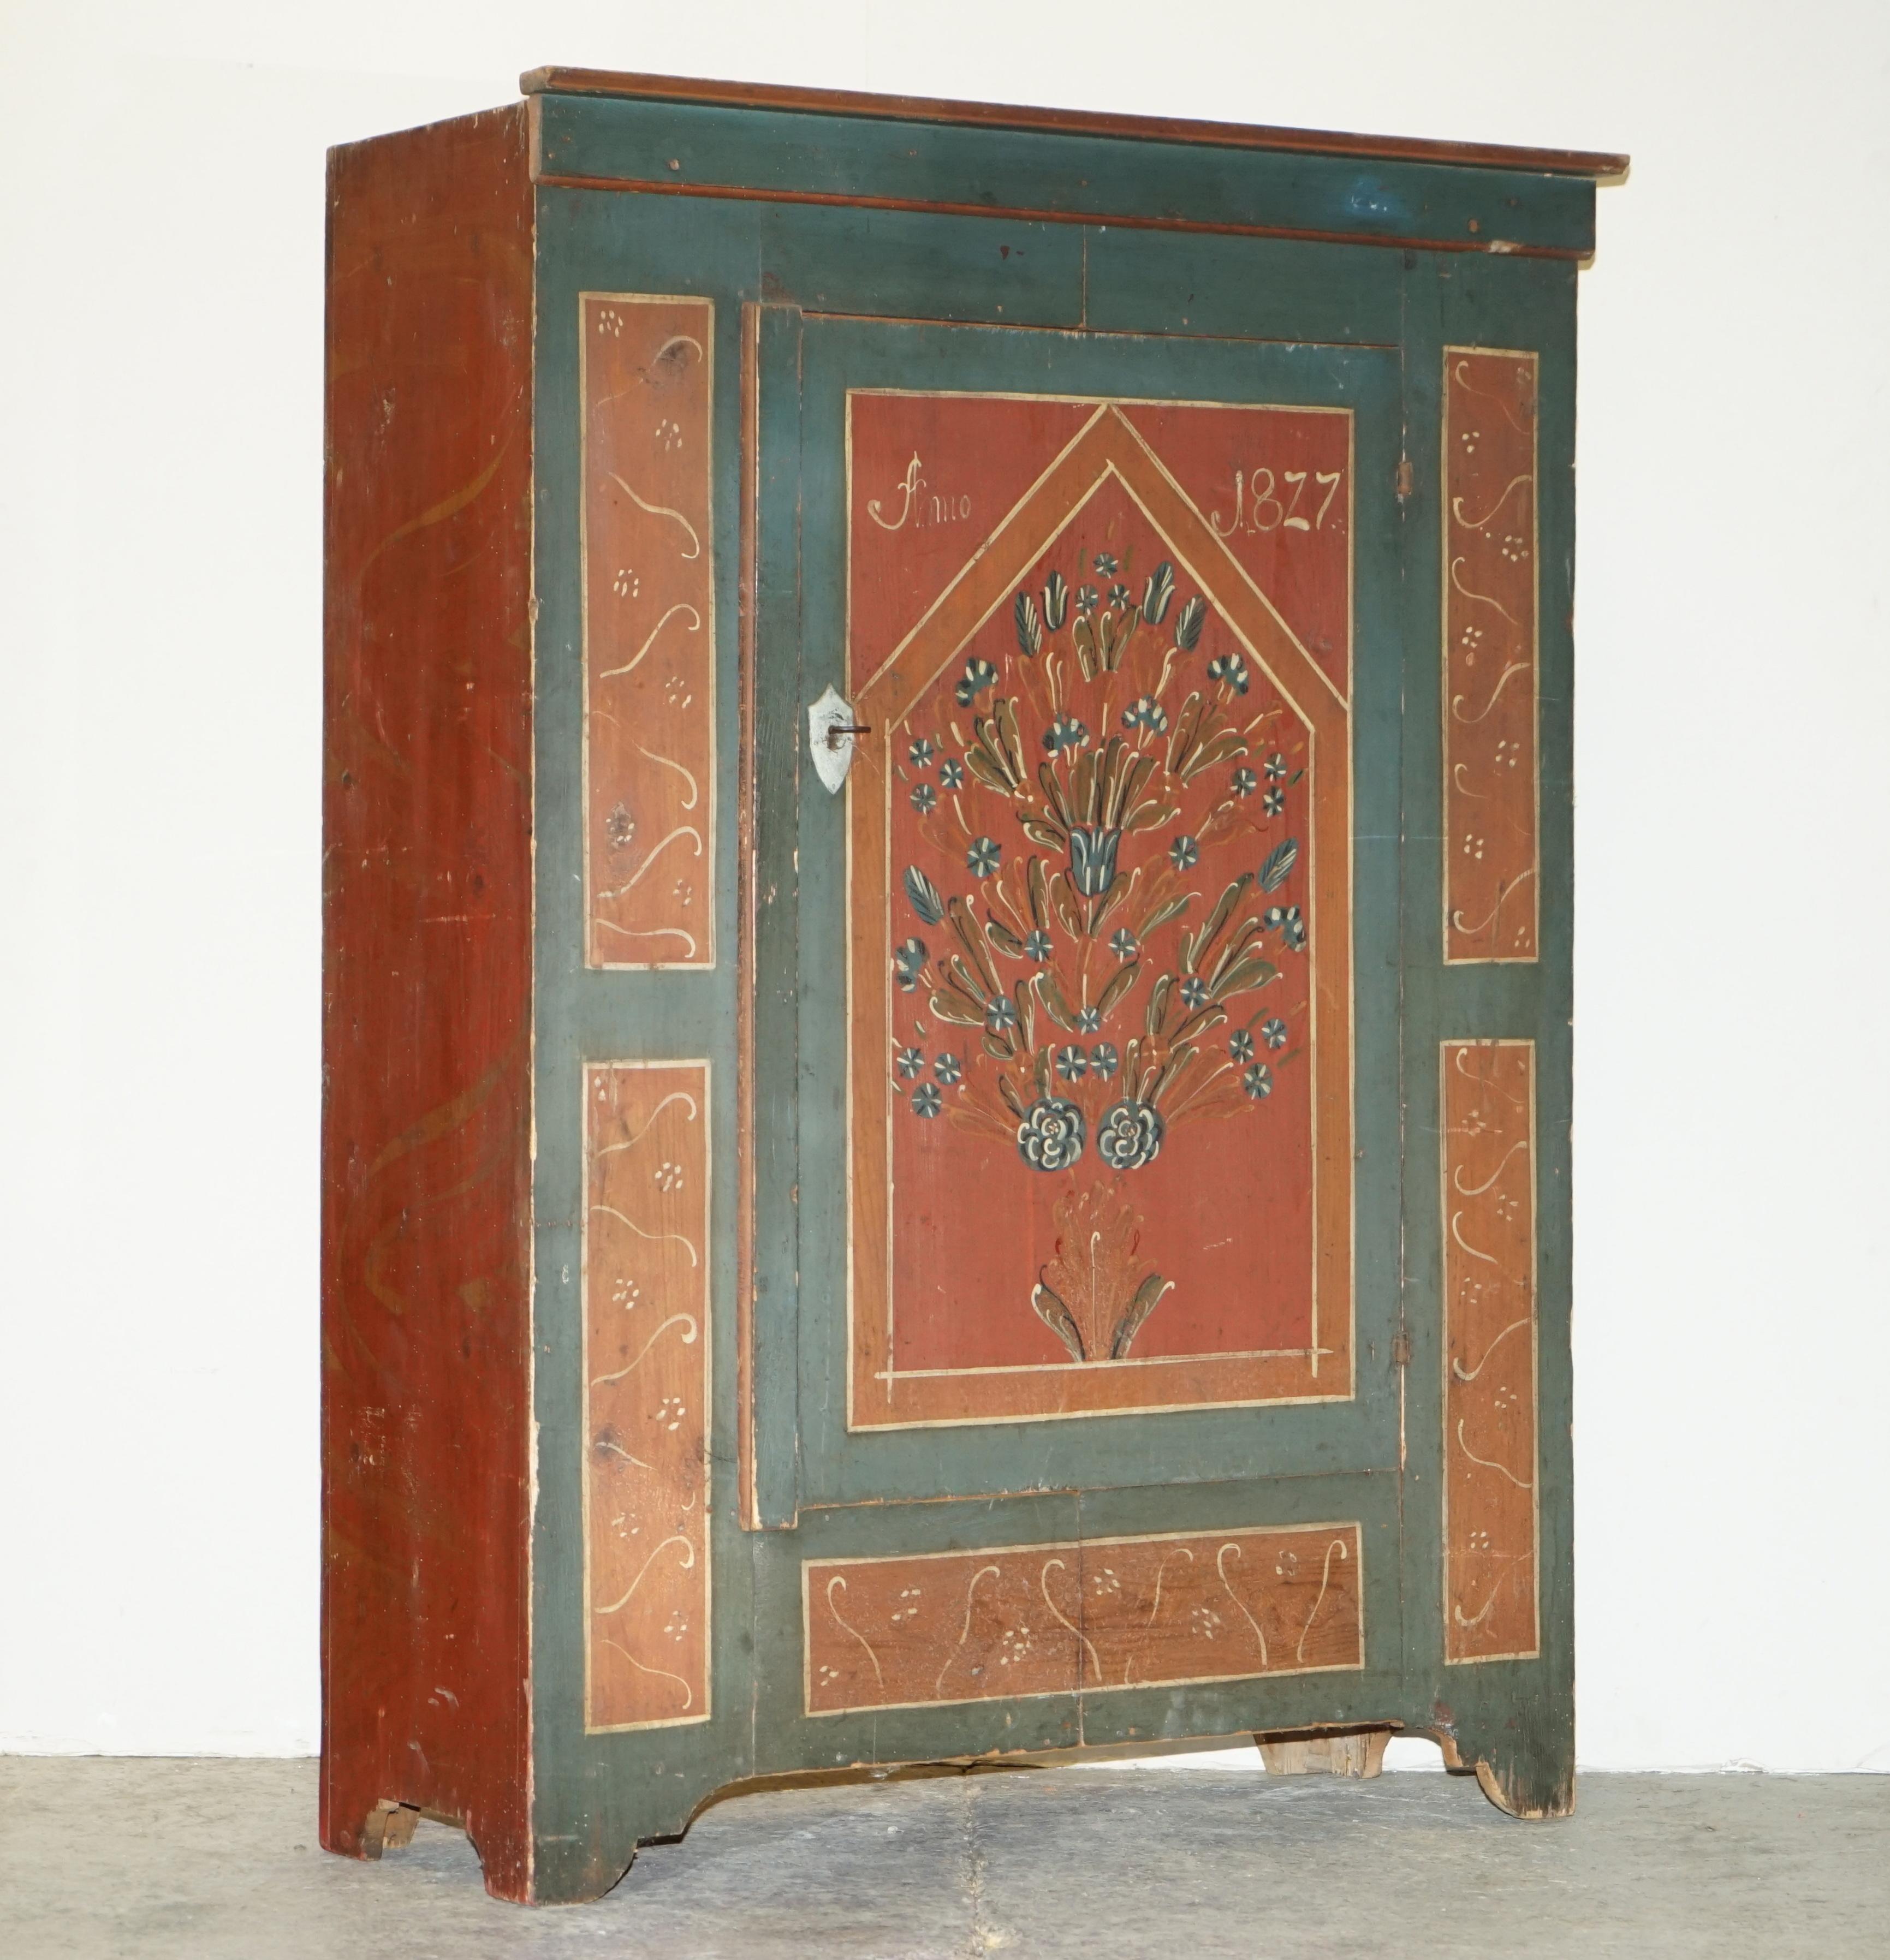 We are delighted to offer for sale this stunning original 1827 dated Antique German folded linen or pot cupboard that can also be used as a wardrobe

I have recently purchased a very large collection of these original, antique painted wardrobes